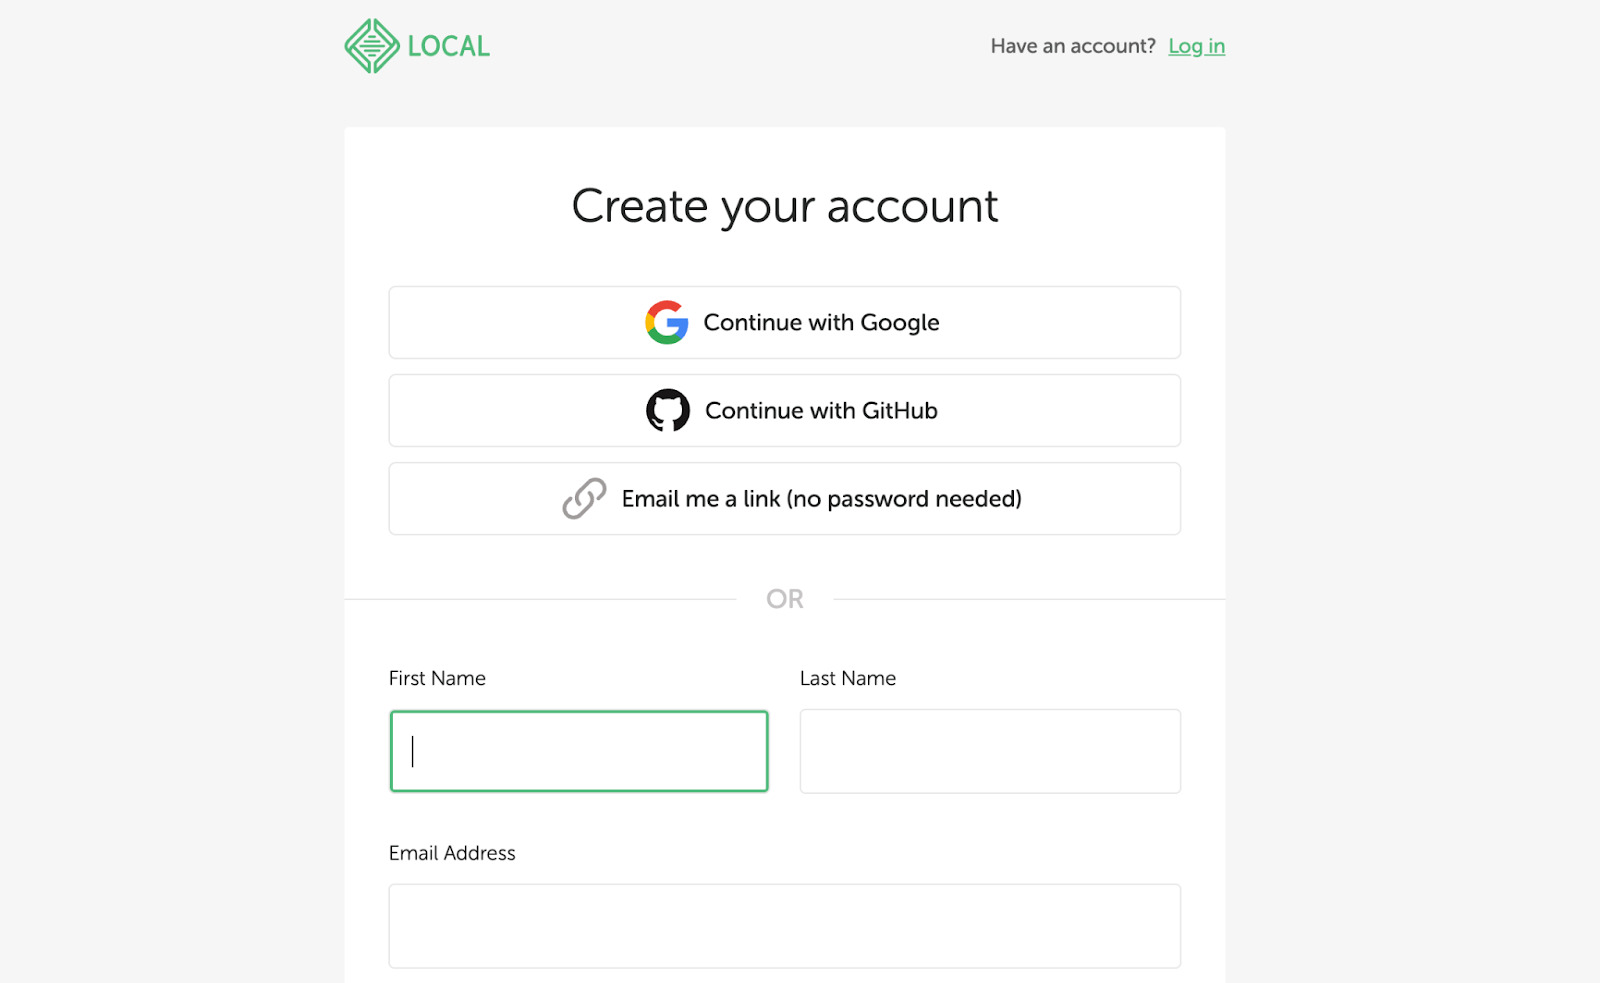 Creating a Local account